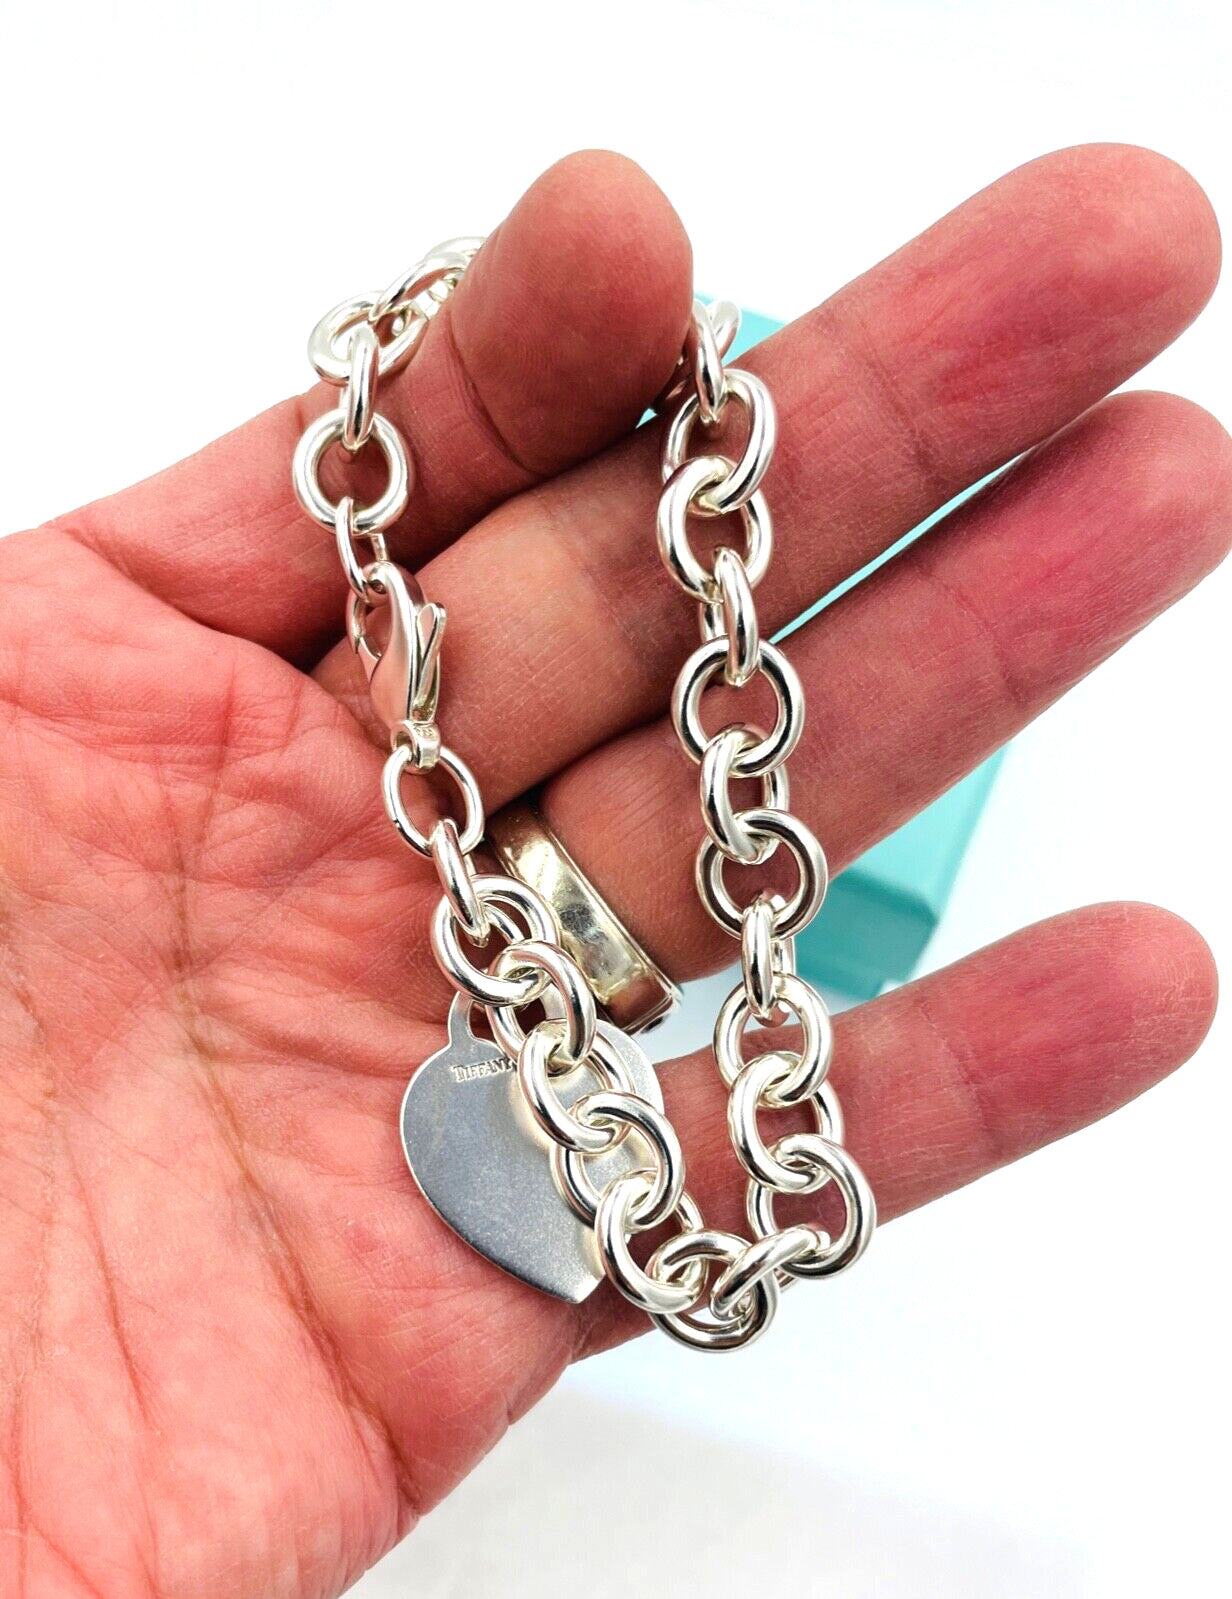 Authentic Tiffany & Co Sterling Silver Heart Tag Charm Bracelet, Tiffany Co  925 Silver Return to Tiffany Heart Disc Chain Link Bracelet - Etsy